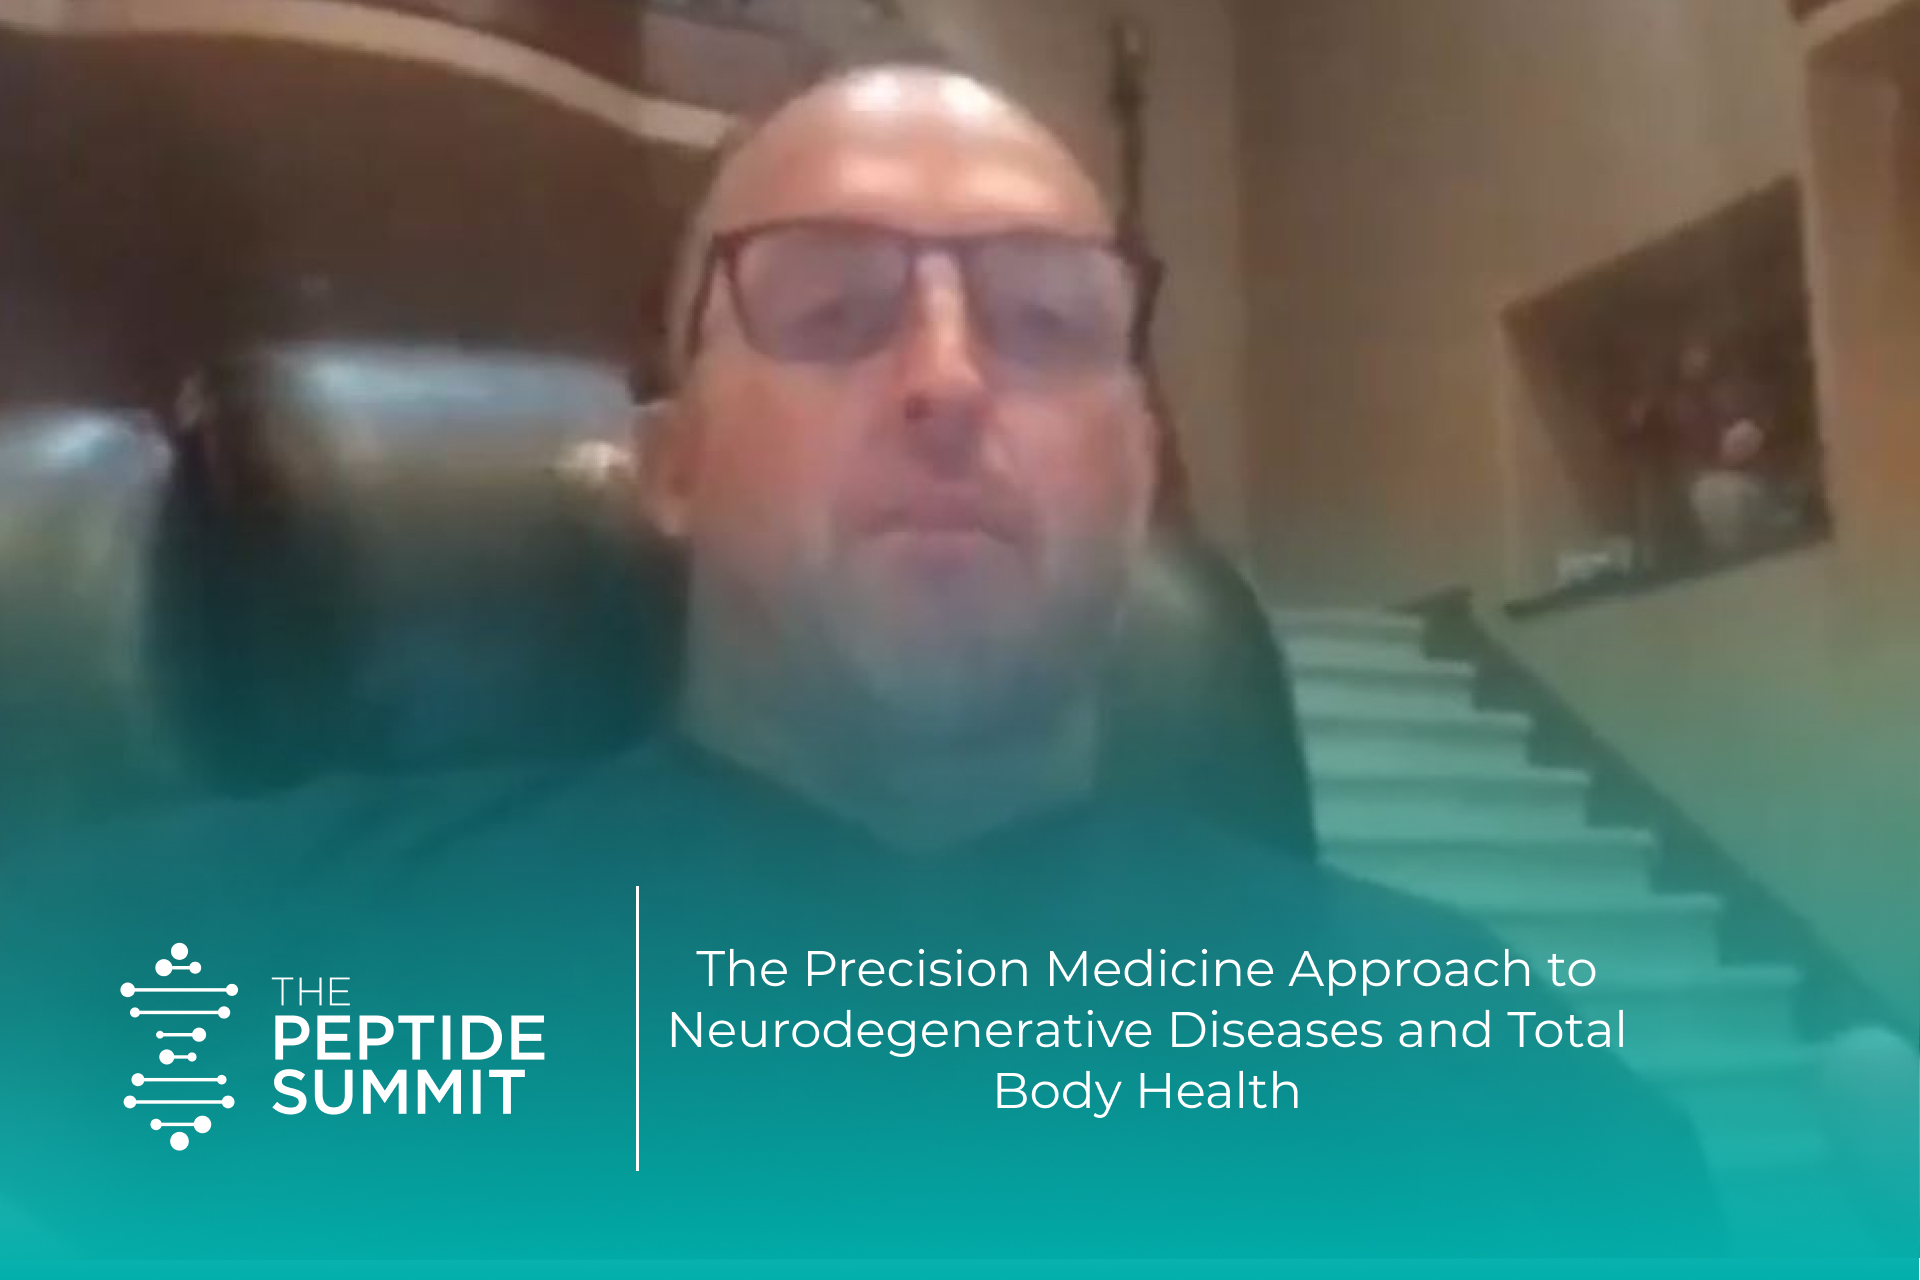 The Precision Medicine Approach to Neurodegenerative Diseases and Total Body Health